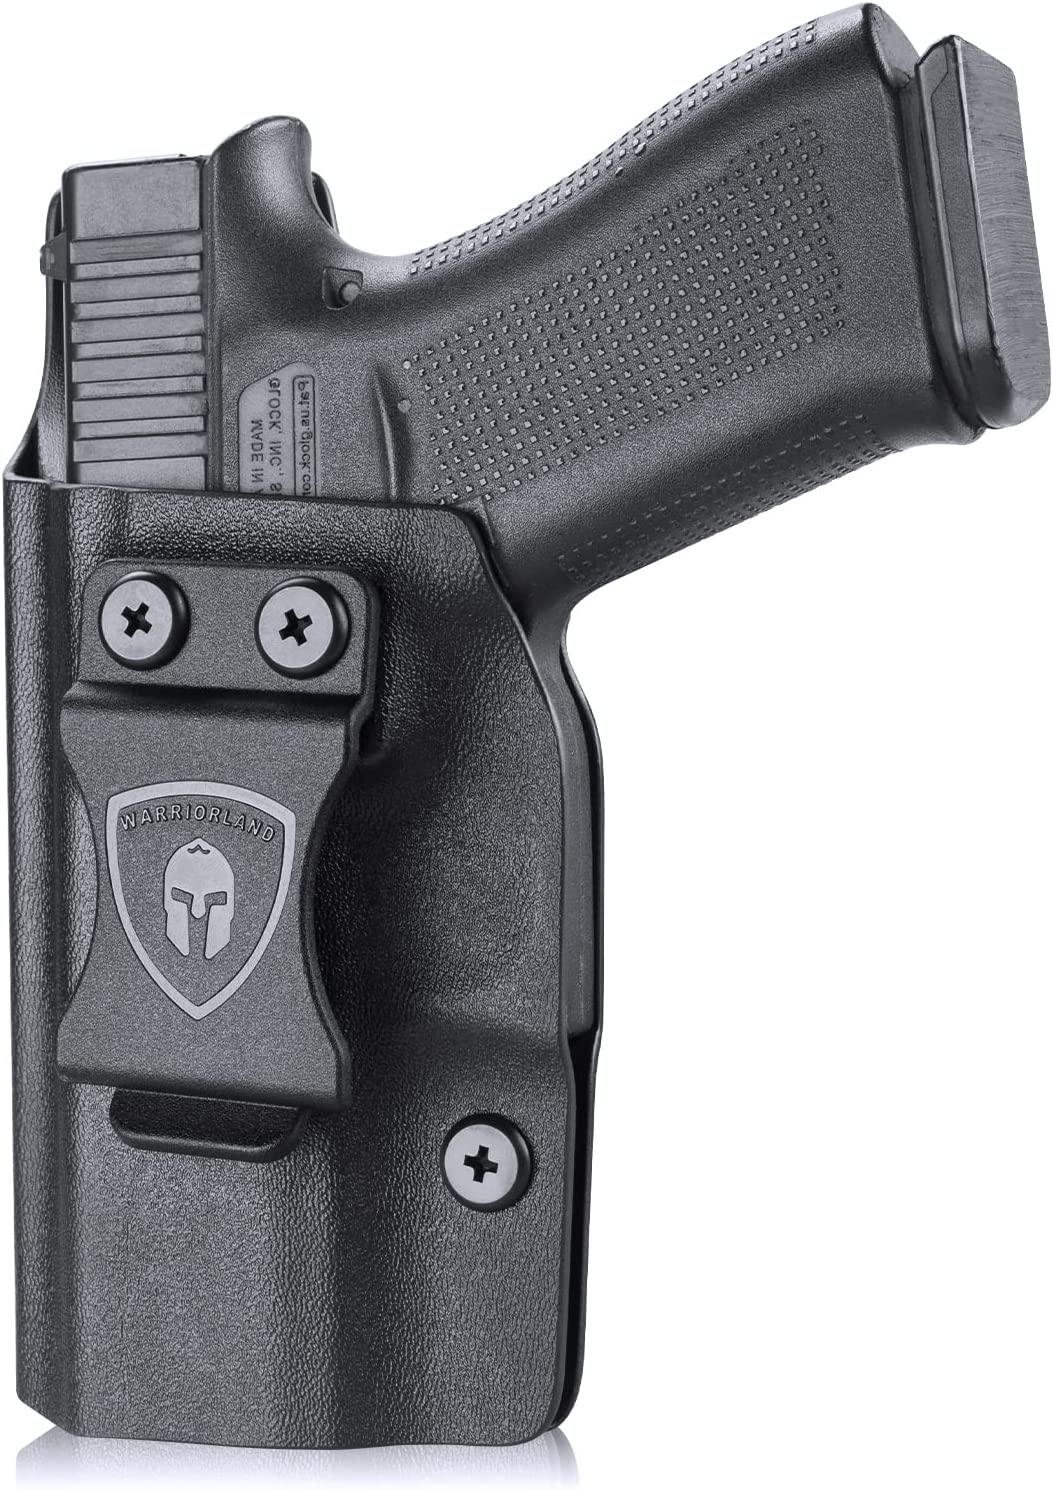 Gun Holster Tactical Concealed Carry Left/right Hand Pistol IWB